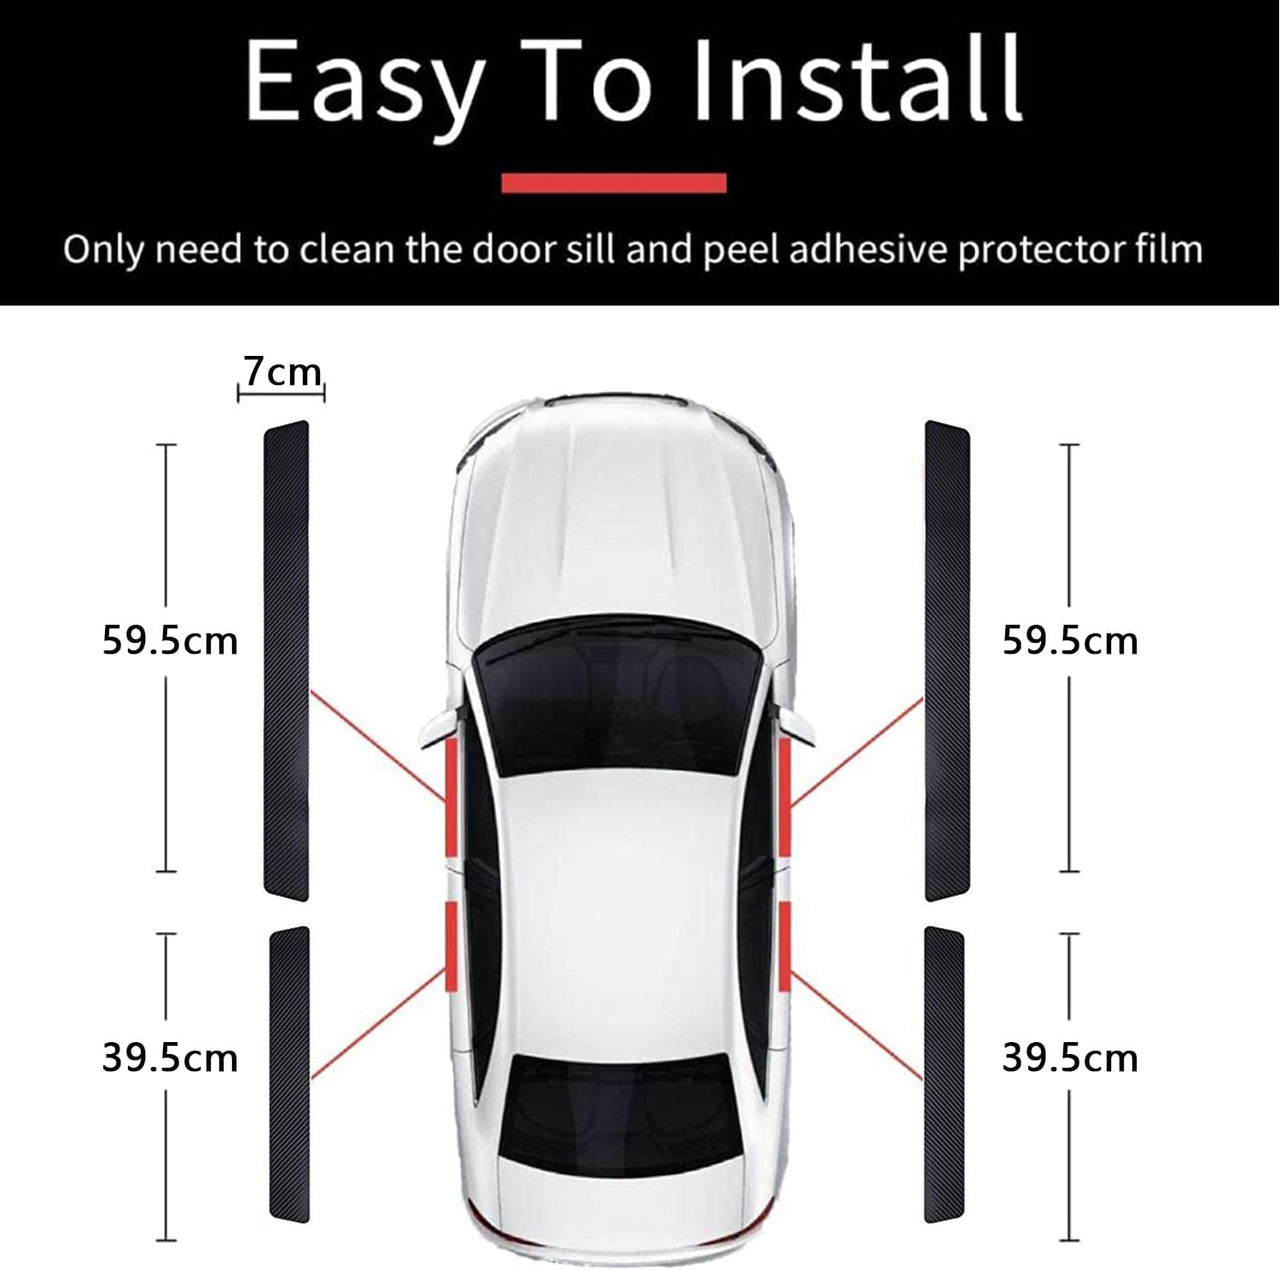 Moveshihua Door Sill Plate Protectors for Nissan Accessory, Carbon Fiber Car Door Entry Guards Sill Scuff Cover Panel Step Protector, Welcome Pedal Protector Cover, 4pcs/Set